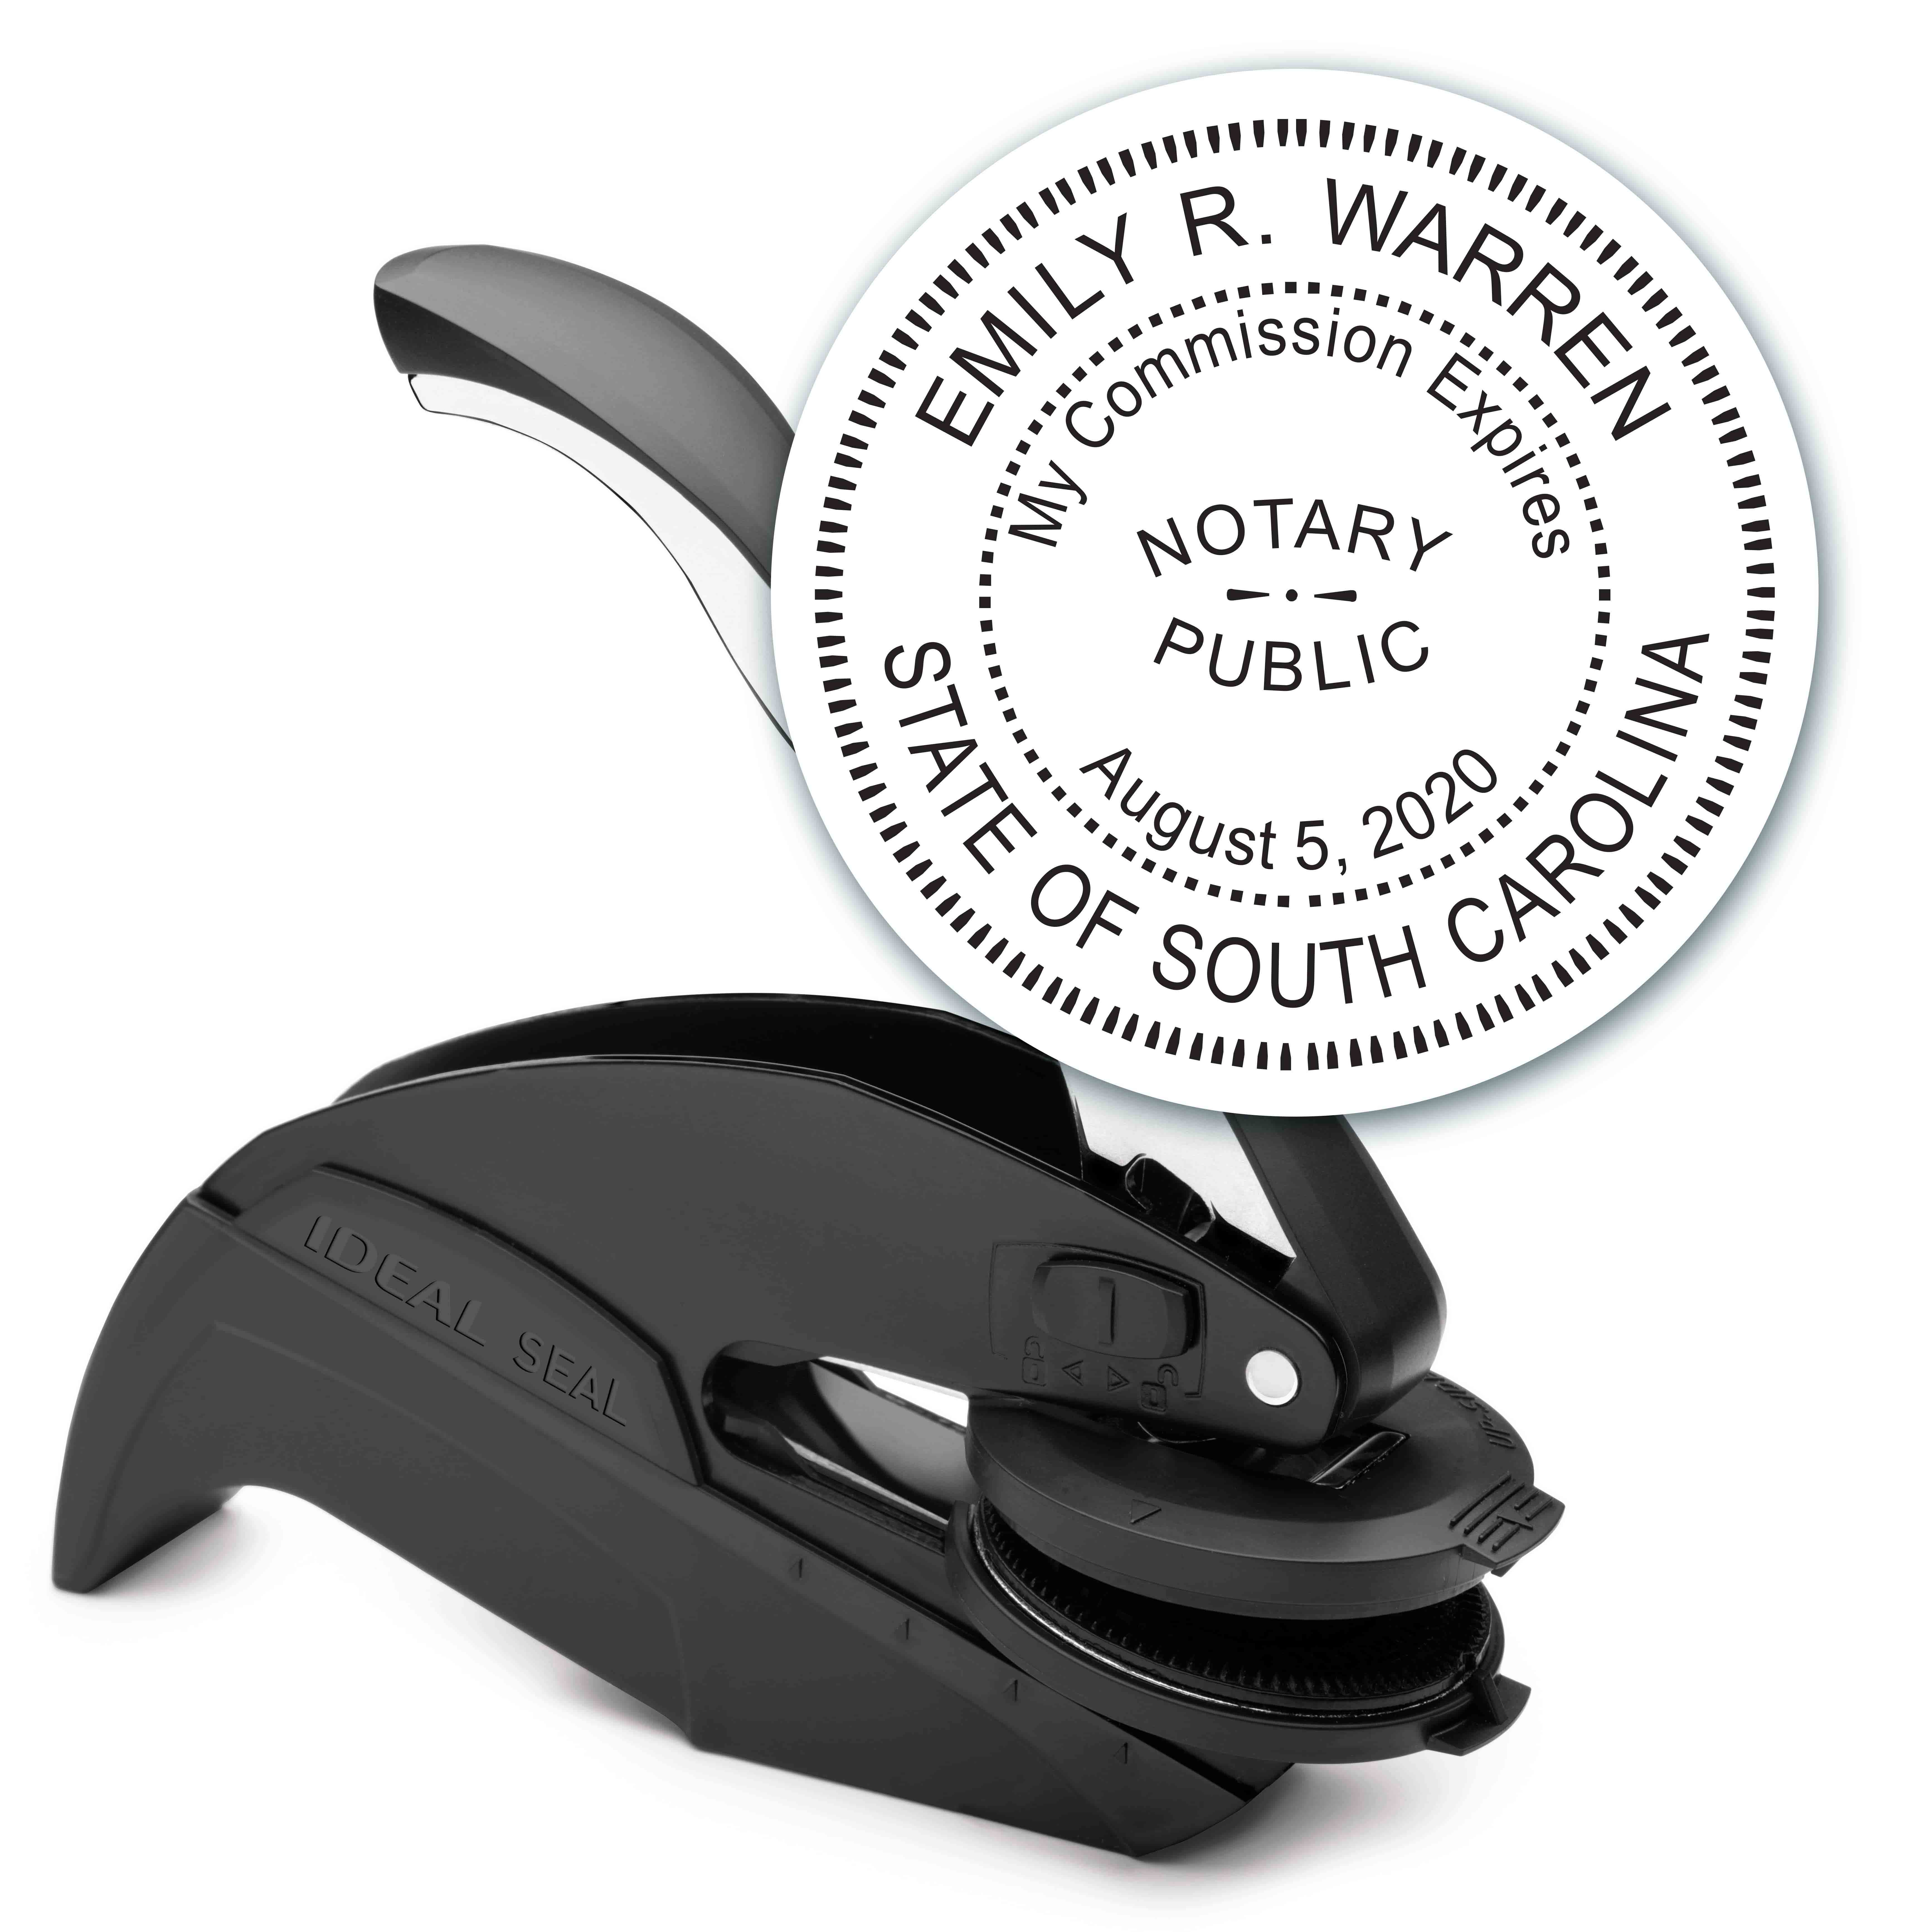 Notary Seal Round Embosser for South Carolina State - Includes Gold Burst Seal Labels (42 count)	